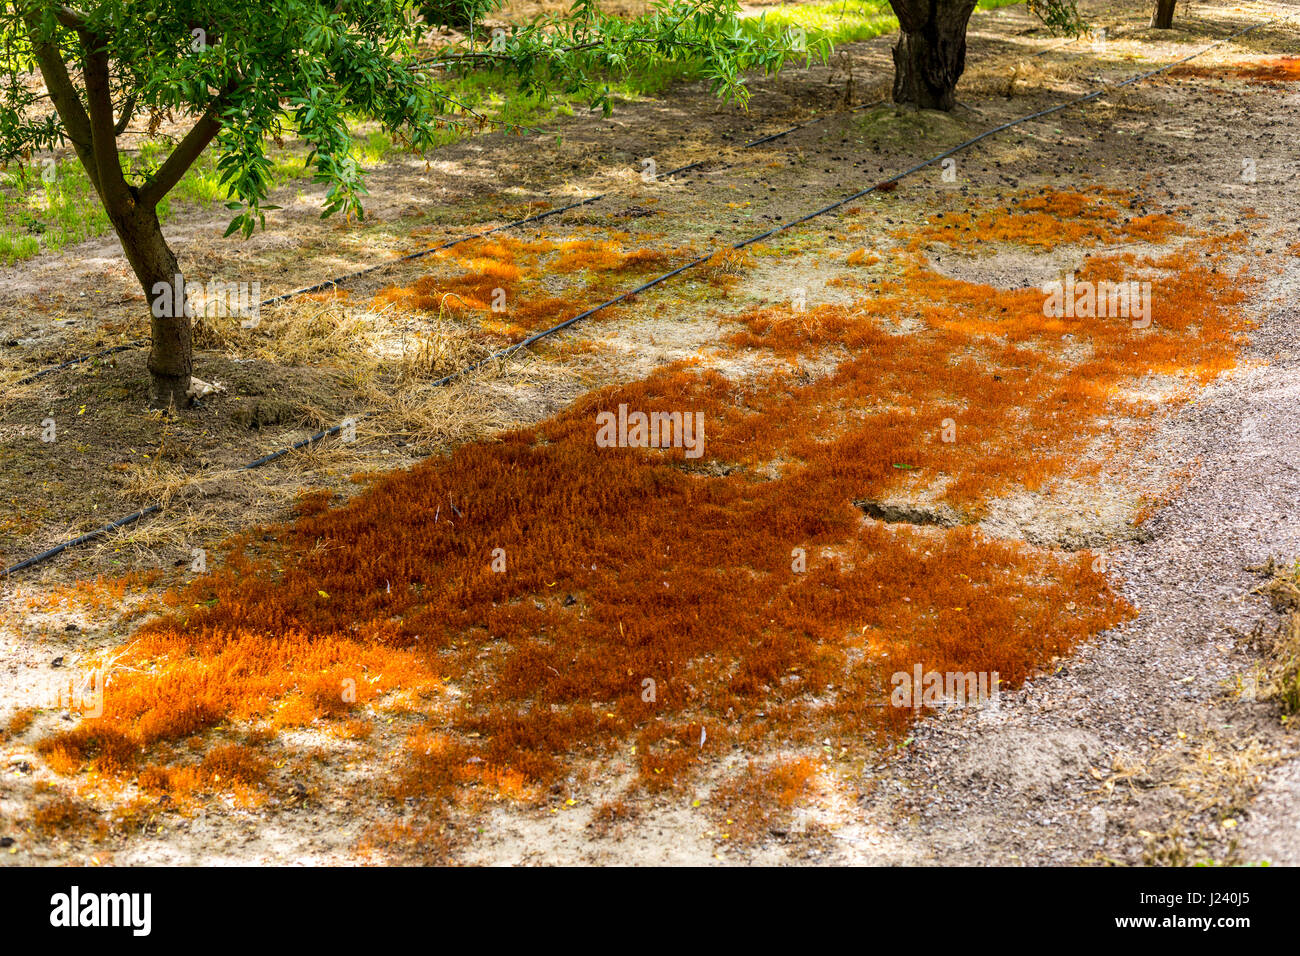 A Bryum capillare moss growing in a California San Joaquin Valley almond orchard Stock Photo